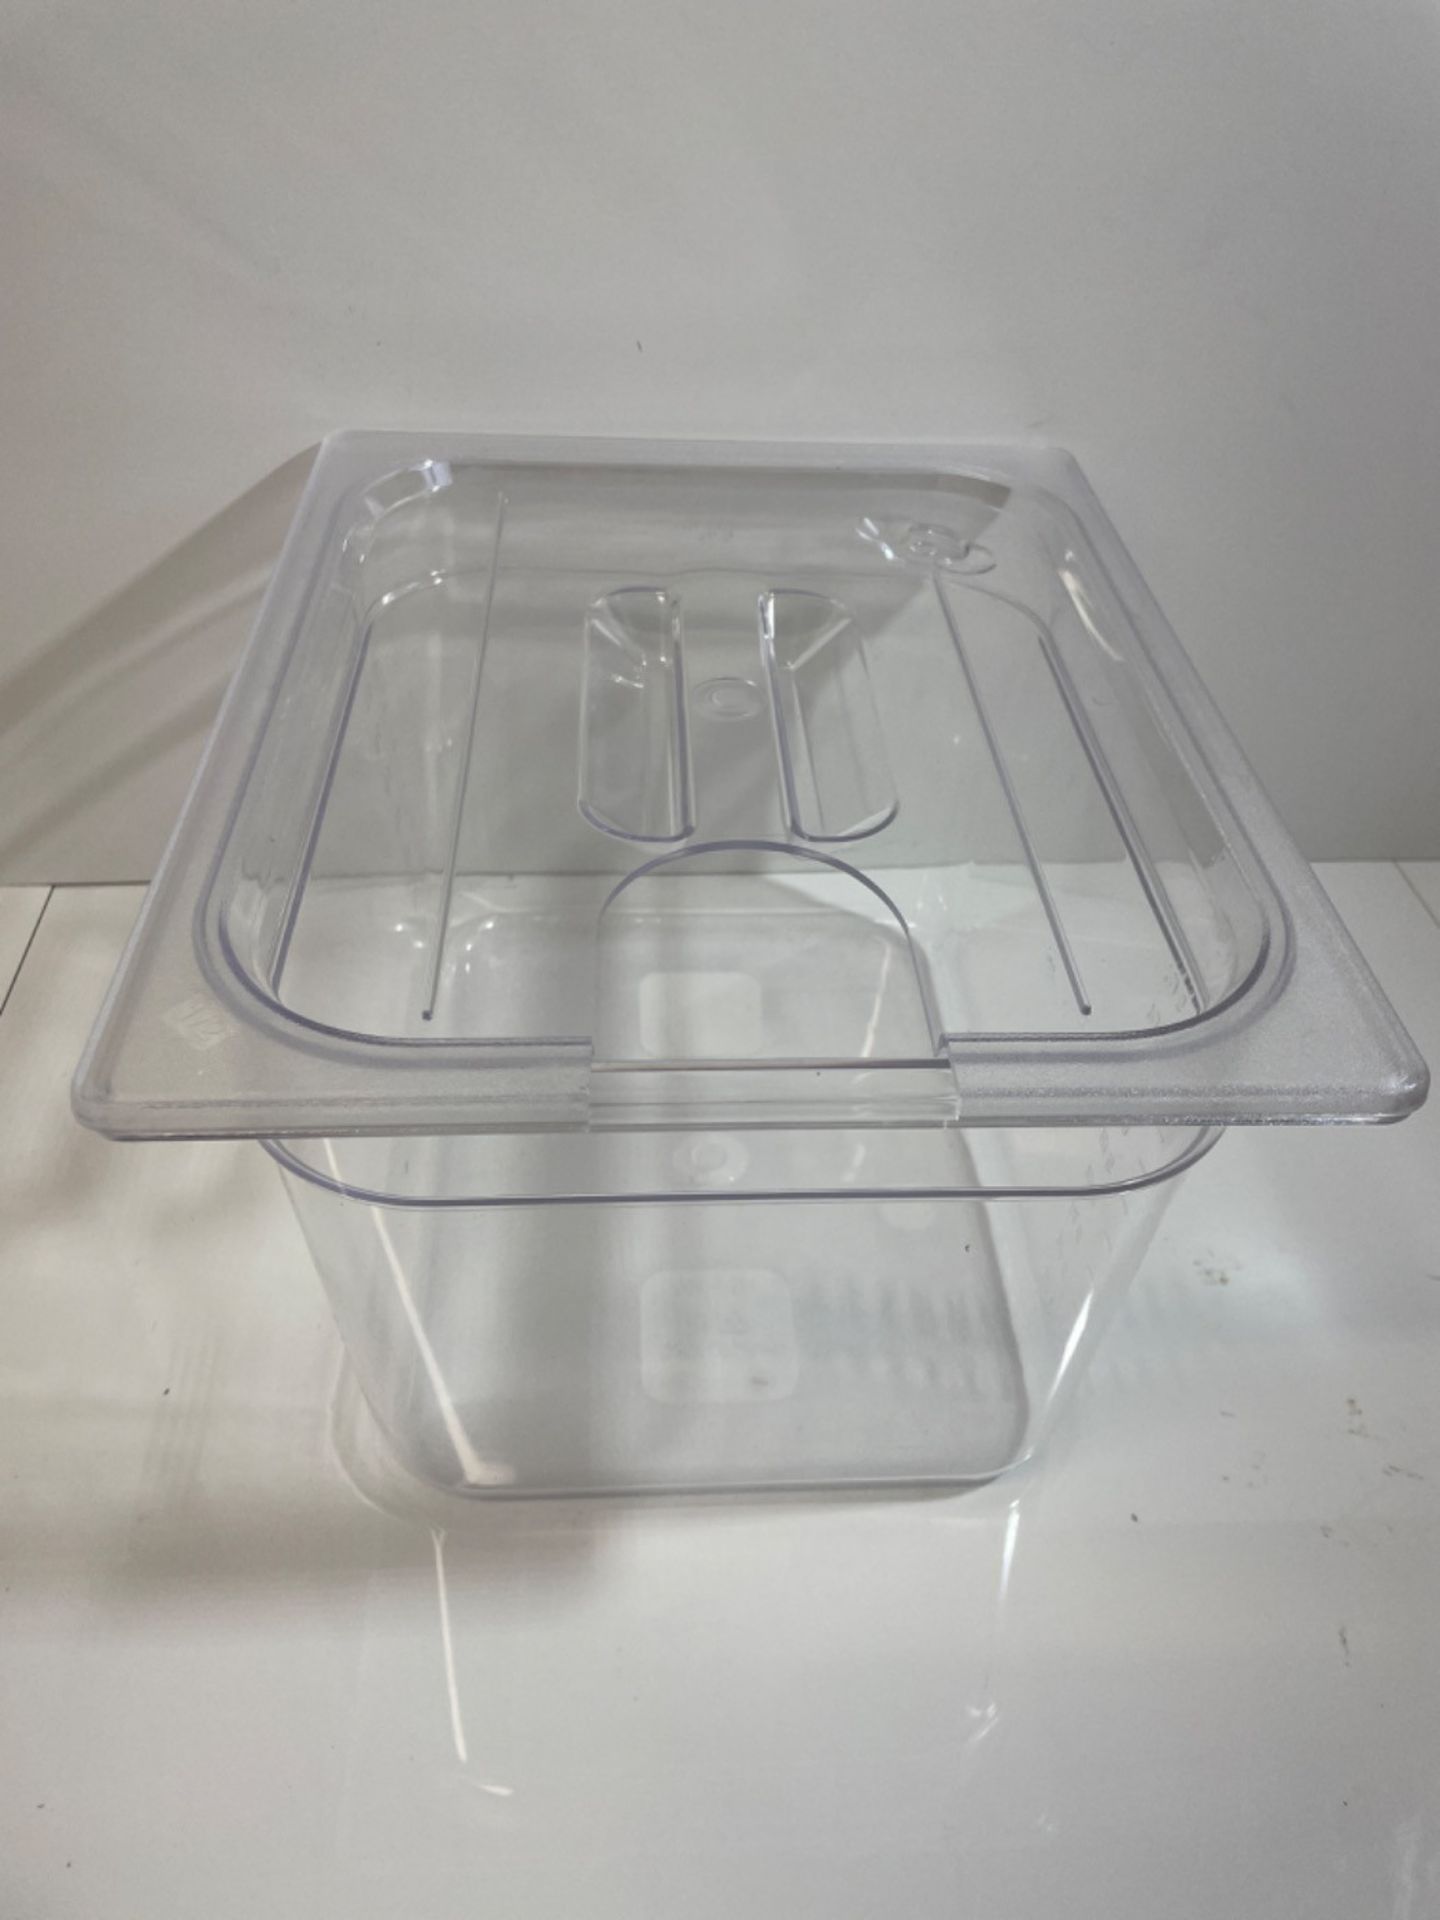 SousVideTools Polycarbonate Container - Custom Cut Lid to Suit the Anova Nano Sous Vide Cooker - Cl - Image 3 of 3